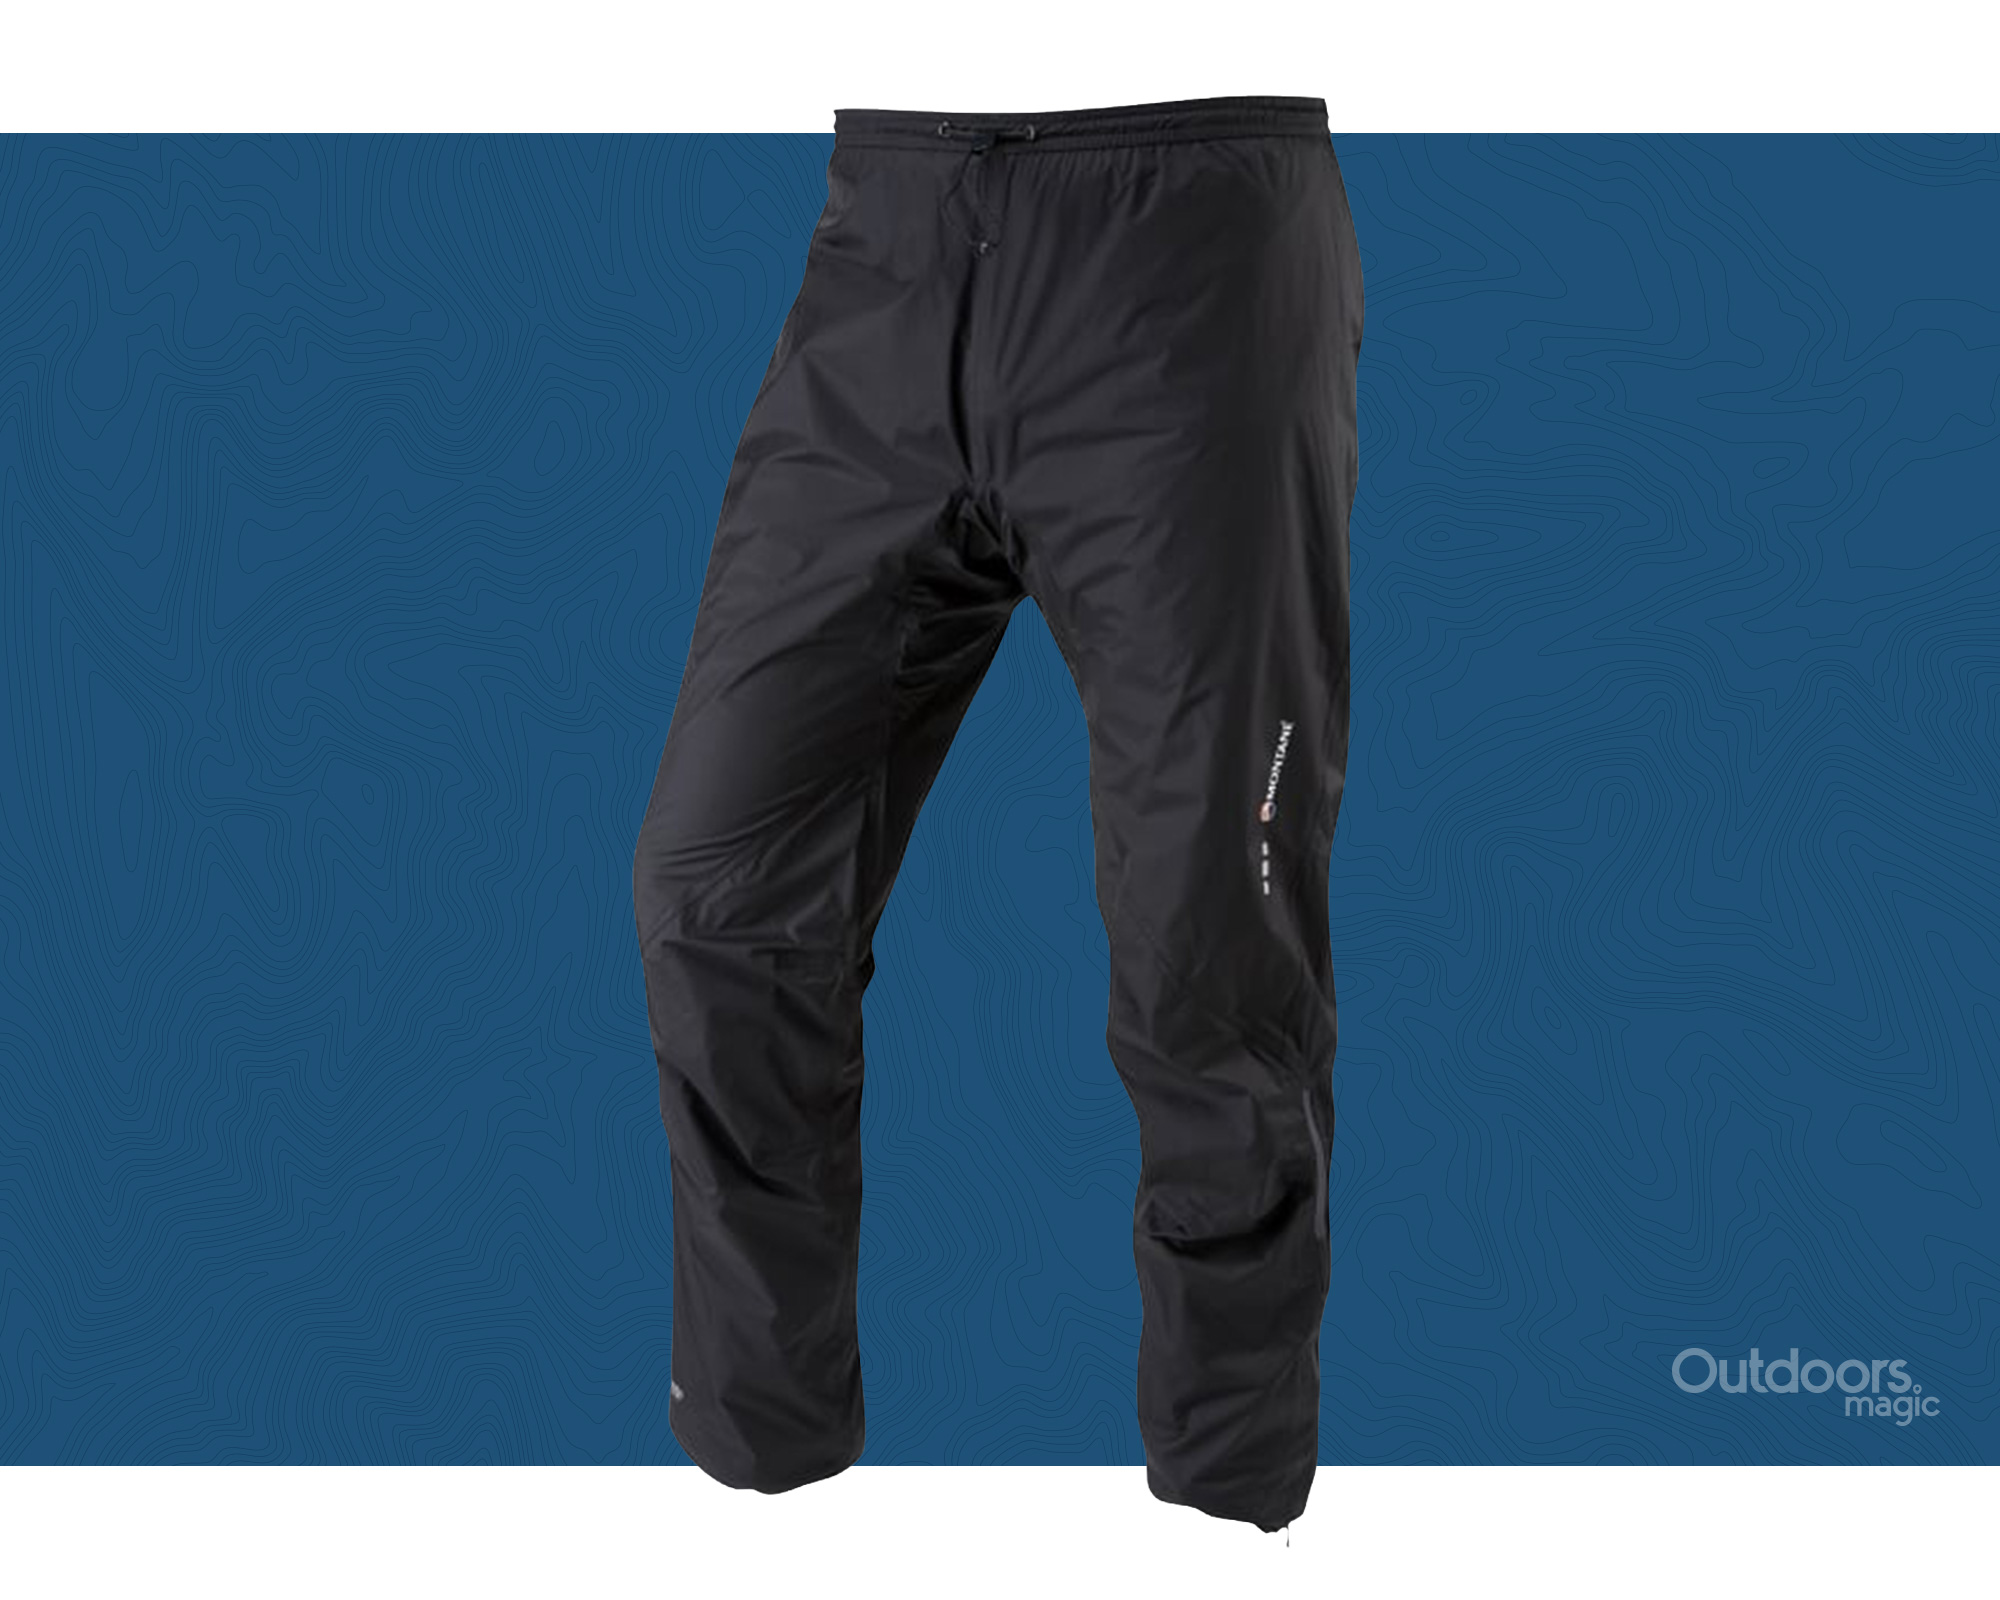 Need waterproof overtrousers? Here's three of the best - Bristol Nordic  Walking